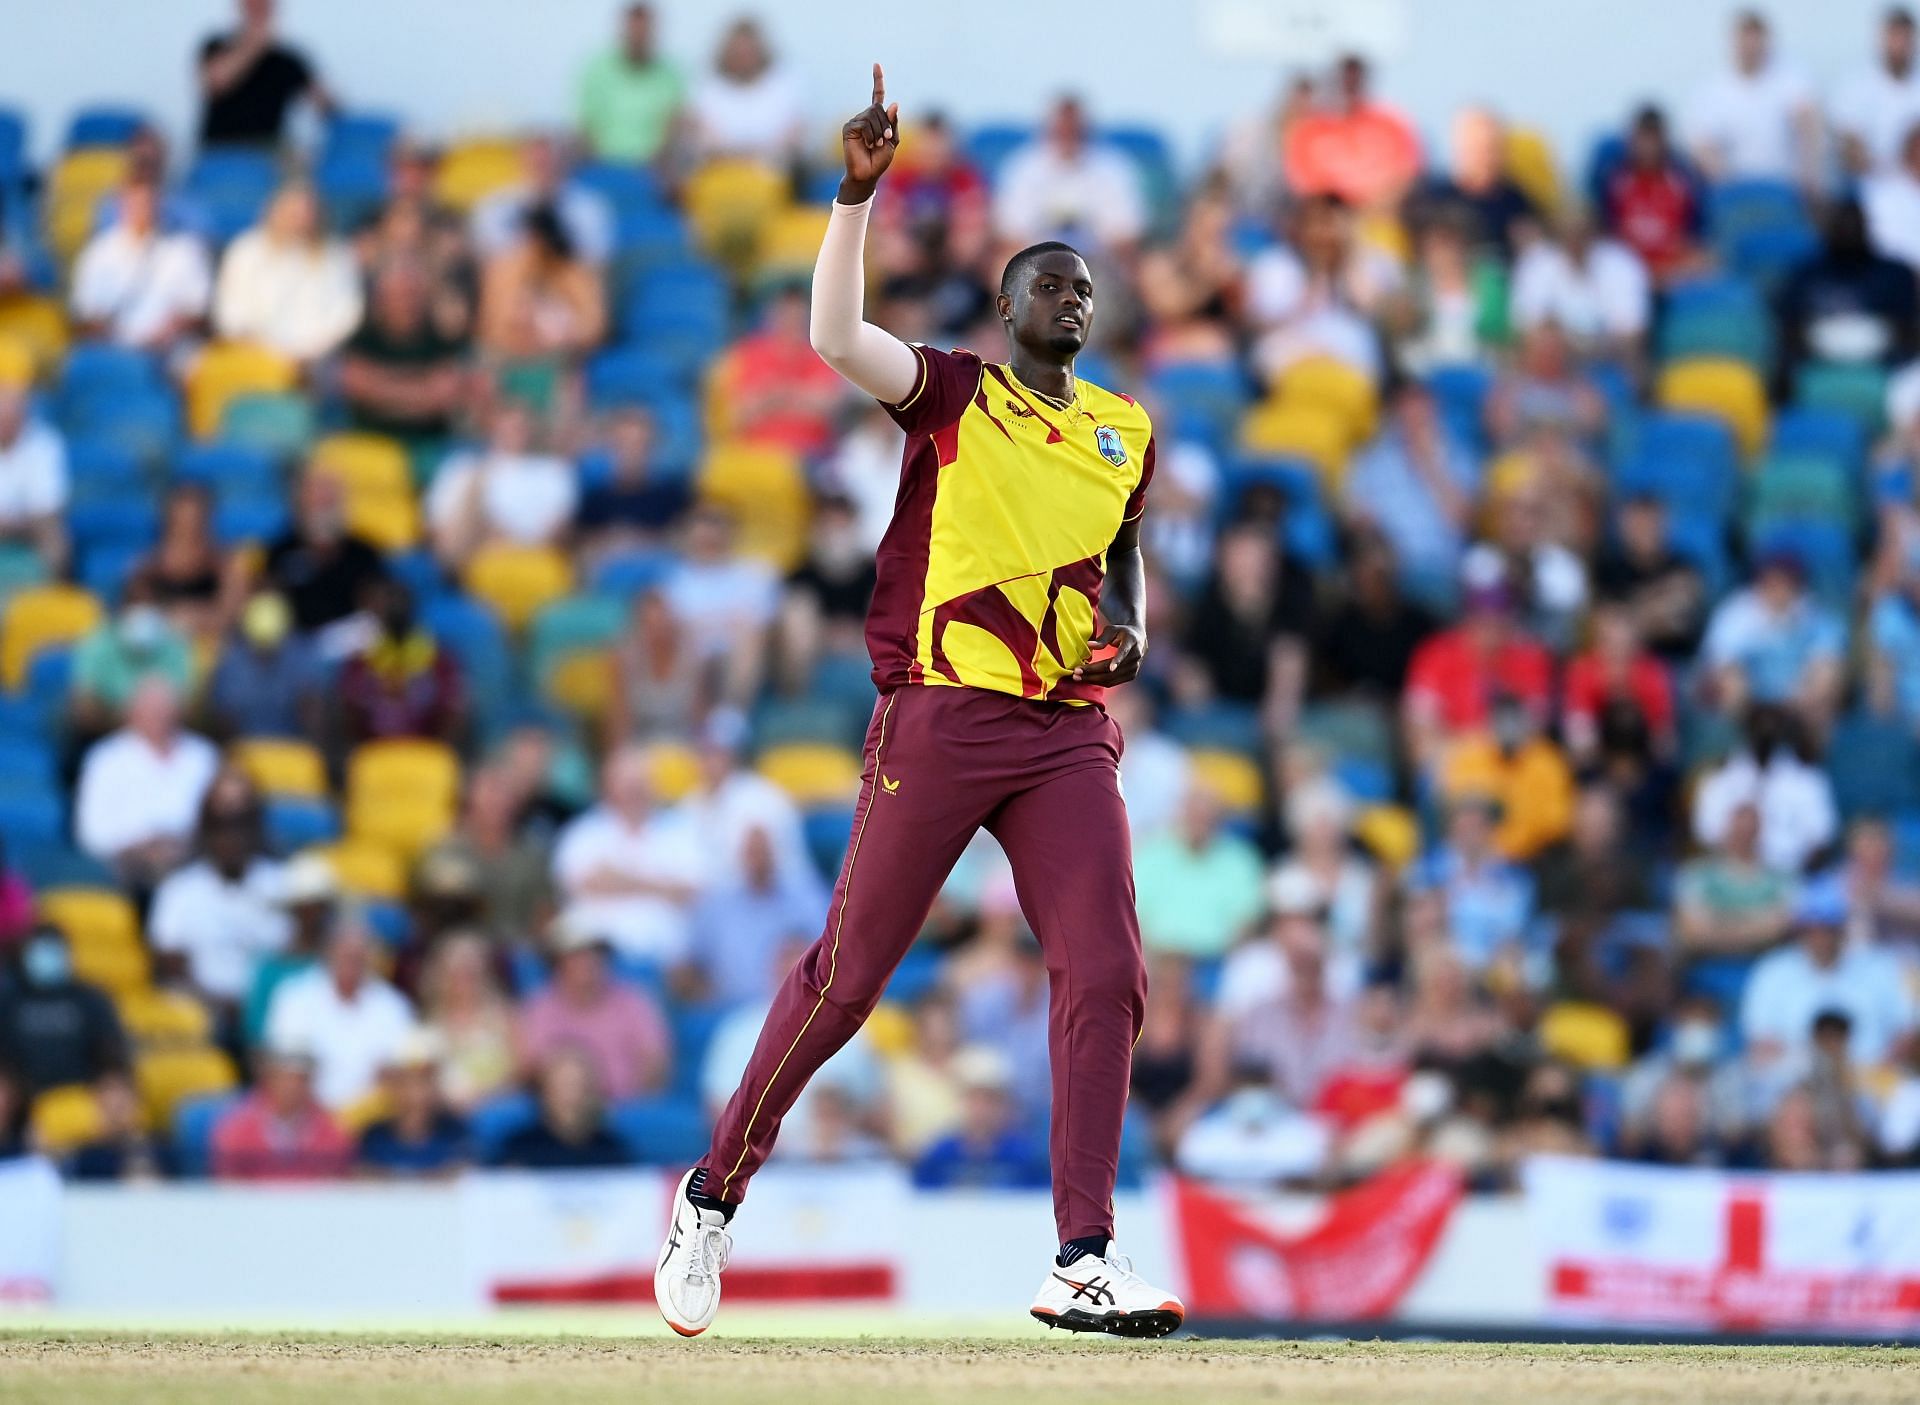 Jason Holder could be the key player for Lucknow Super Giants